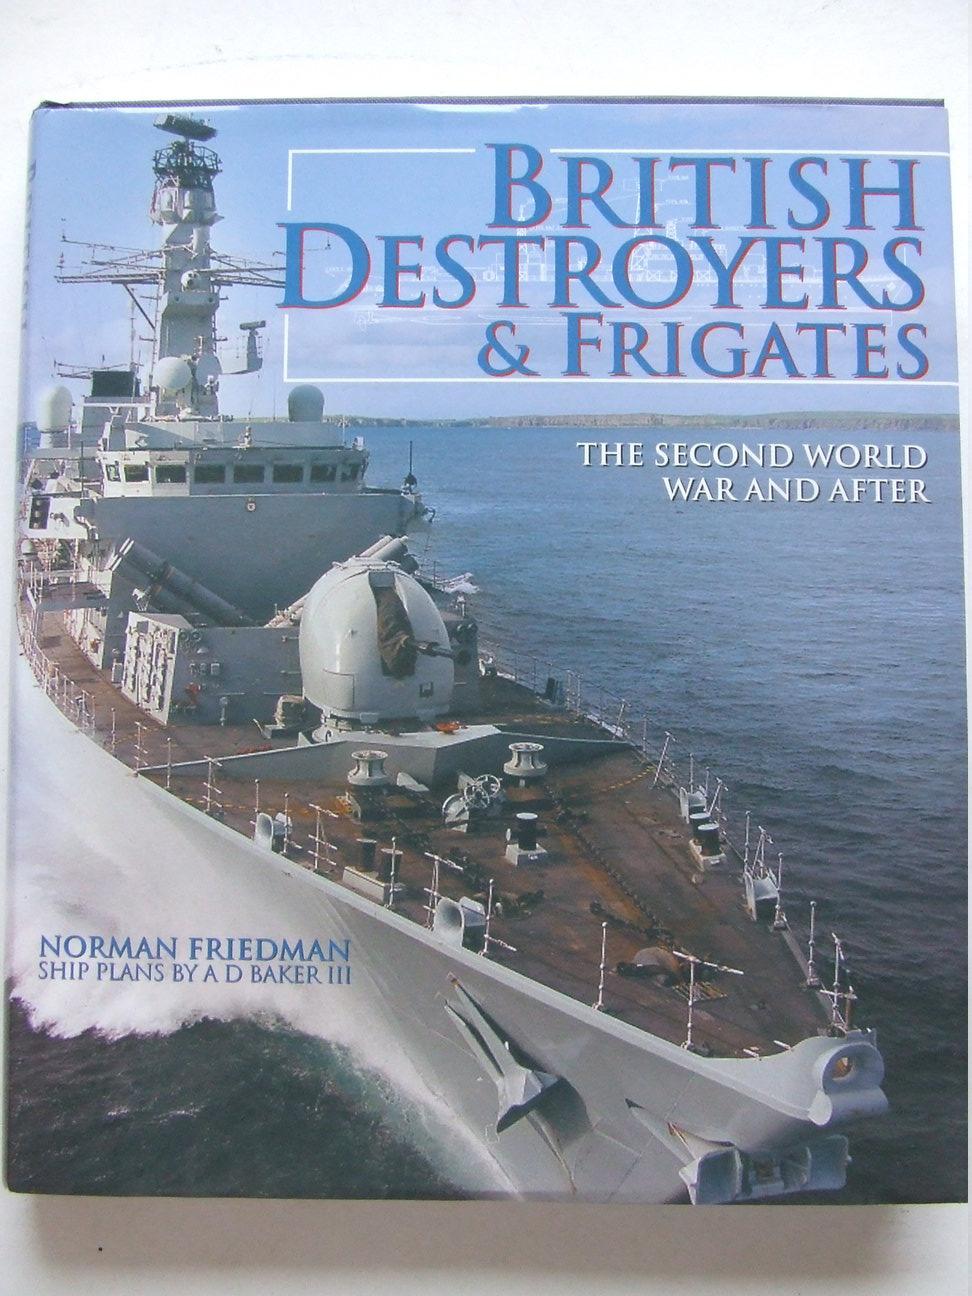 British Destroyers & Frigates, the second world war and after. - Friedman, Norman ISBN 1-86176-137-6 .